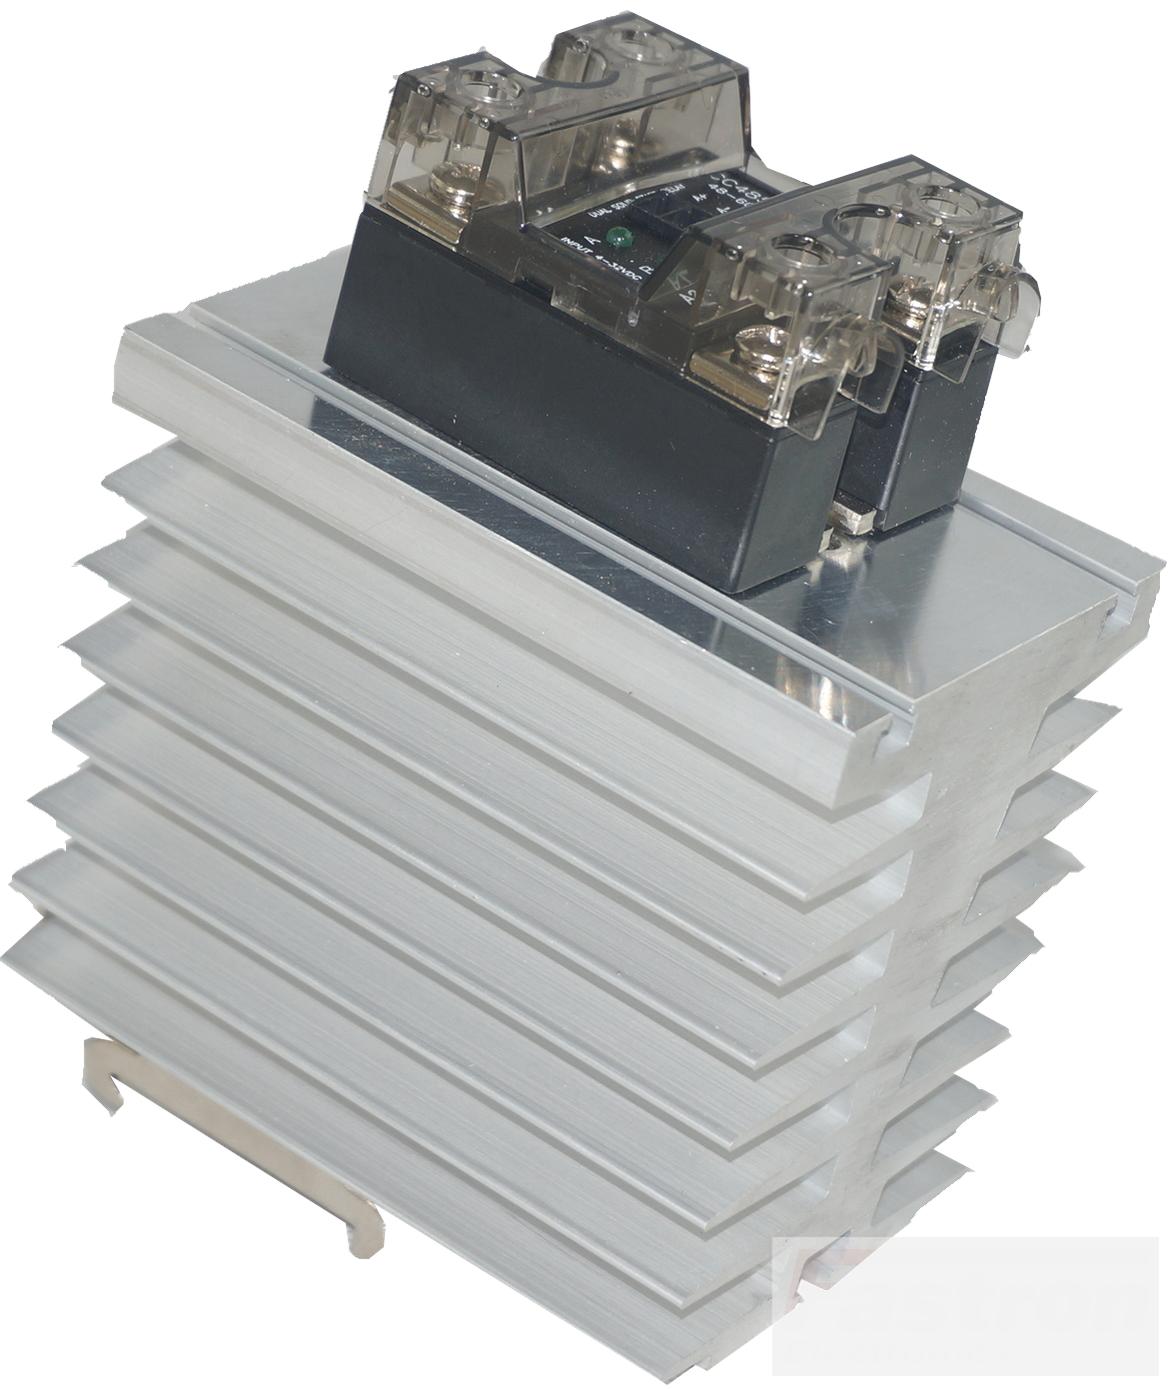 GFIN/100M-DR + CC4850W3VH, Din Rail Mount Dual Solid State Relay with Heatsink, 4-32VDC Control Input, LED Status Indicator, 1200V Transient withstand, 48-600VAC Output, 2 x 24 Amps @ 40 Deg C ambient-Solid State Relay Heatsink Assembly AC Load-Fastron Electronics-Fastron Electronics Store